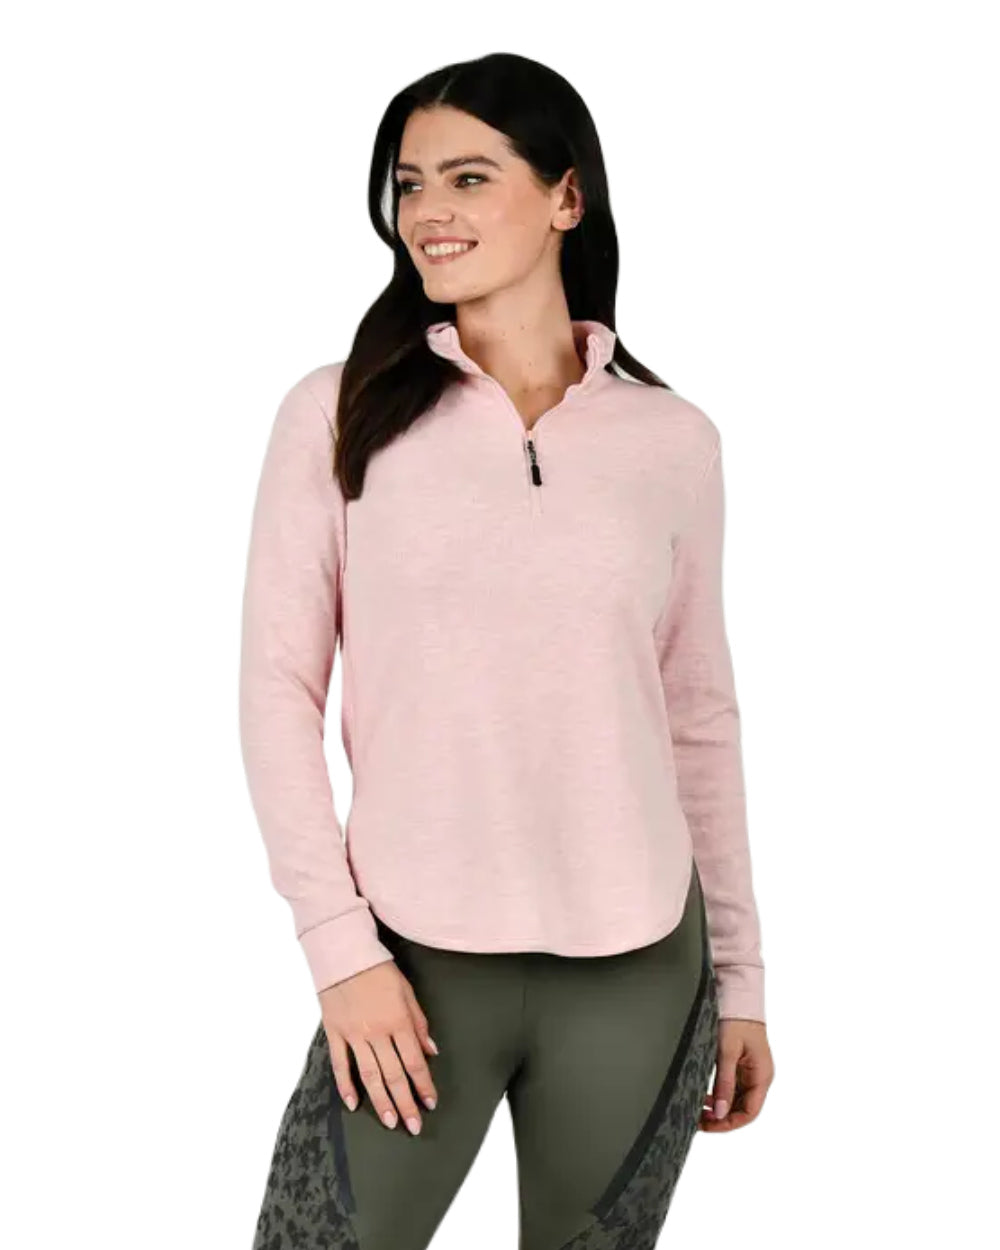 Blush Coloured WeatherBeeta London Layer Long Sleeve Top On A White Background 